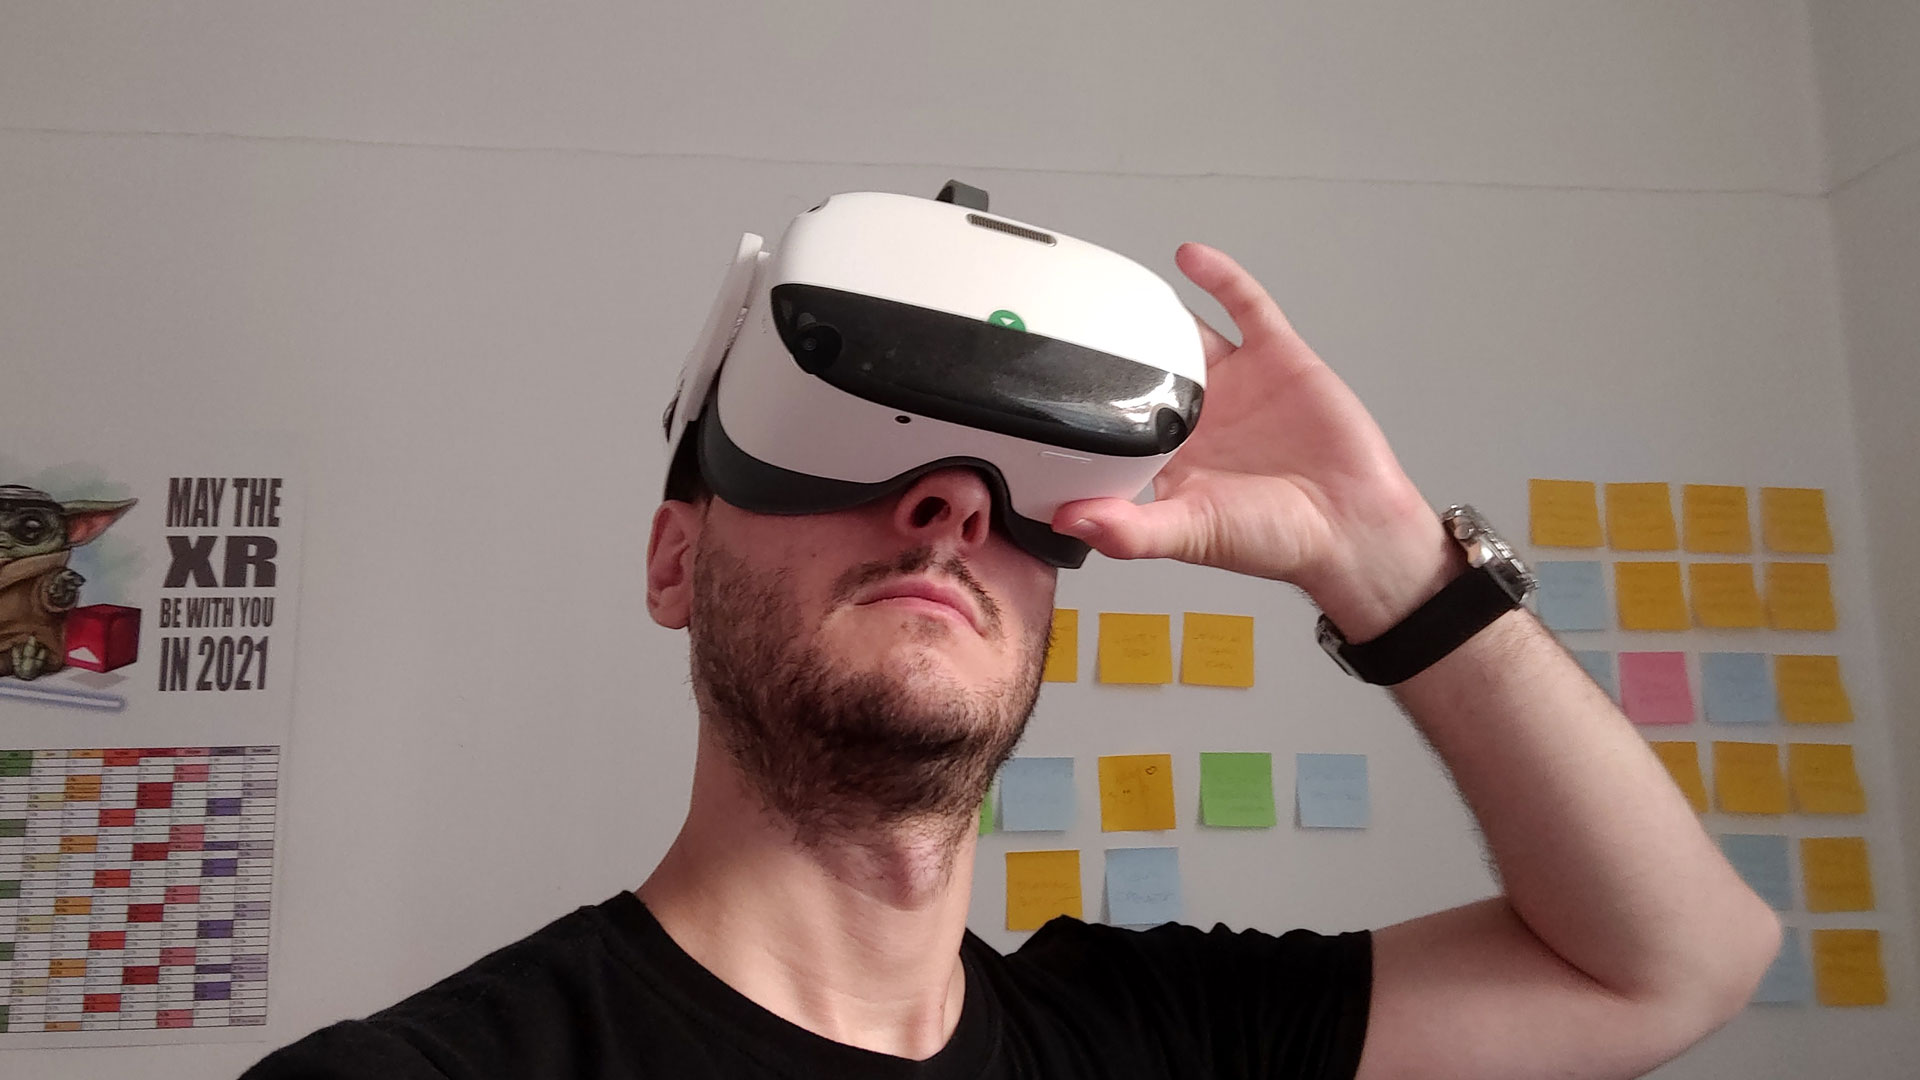 Meta Quest 3 Augmented Reality Headset - Unboxing and 1st Impressions 